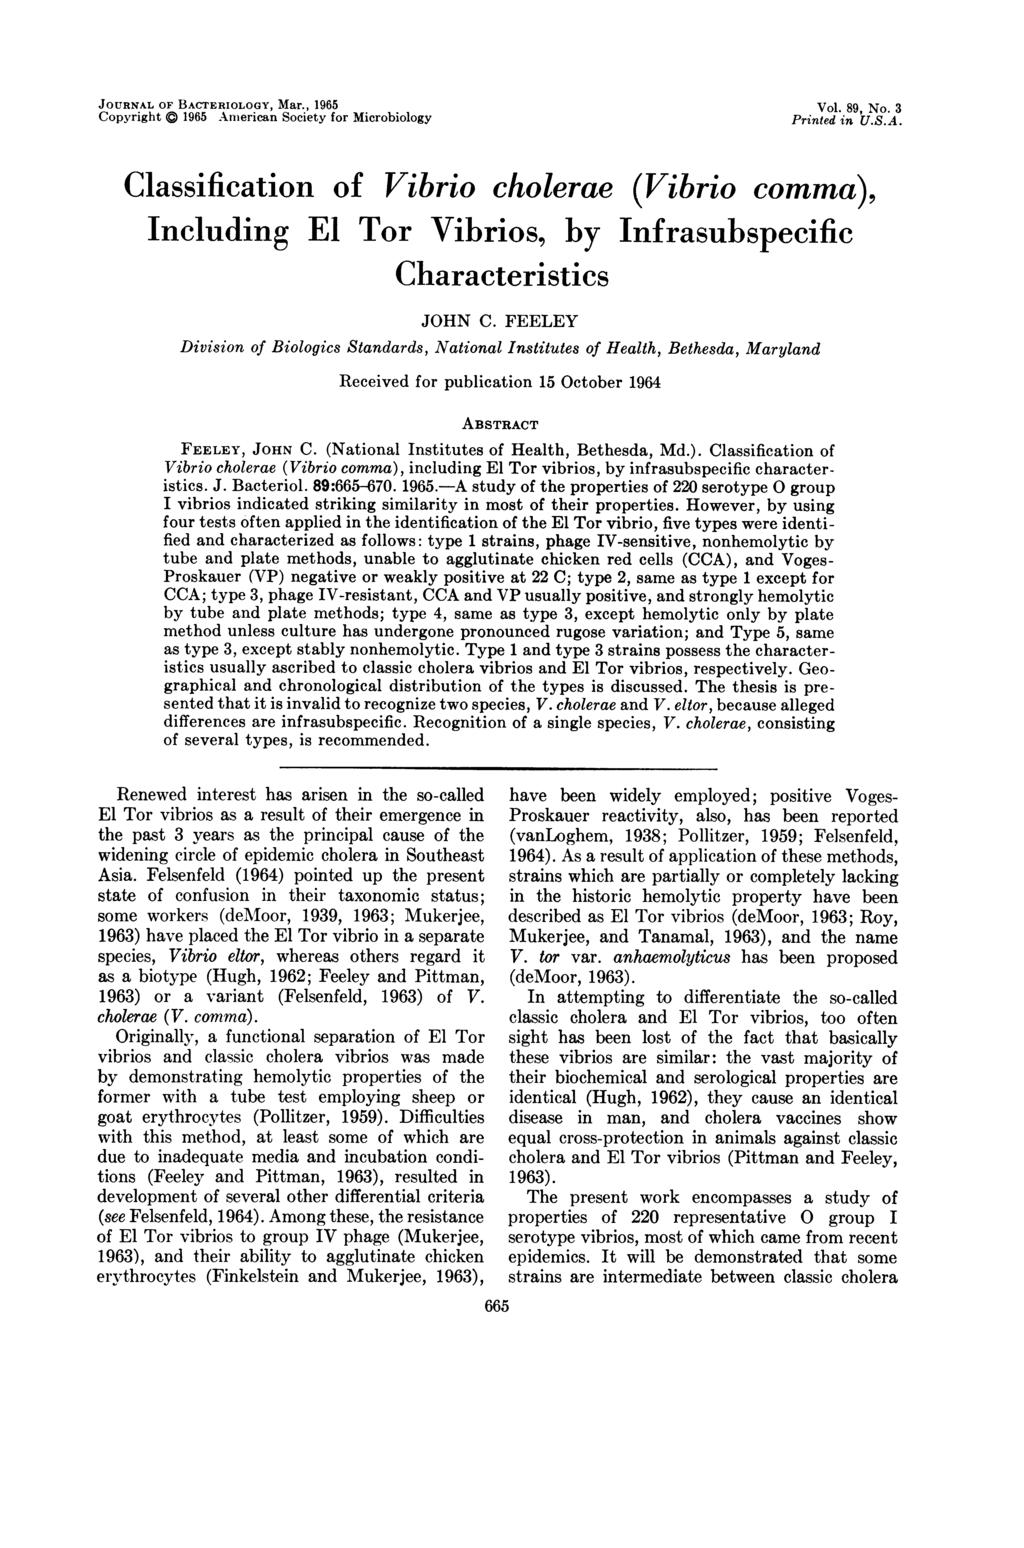 JOURNAL OF BACTERIOLOGY, Mar., 1965 Copyright 1965 Amnerican Society for Microbiology Vol. 89, No. 3 Printed in U.S.A. Classification of Vibrio cholerae (Vibrio comma) Including El Tor Vibrios, by Infrasubspecific Characteristics JOHN C.